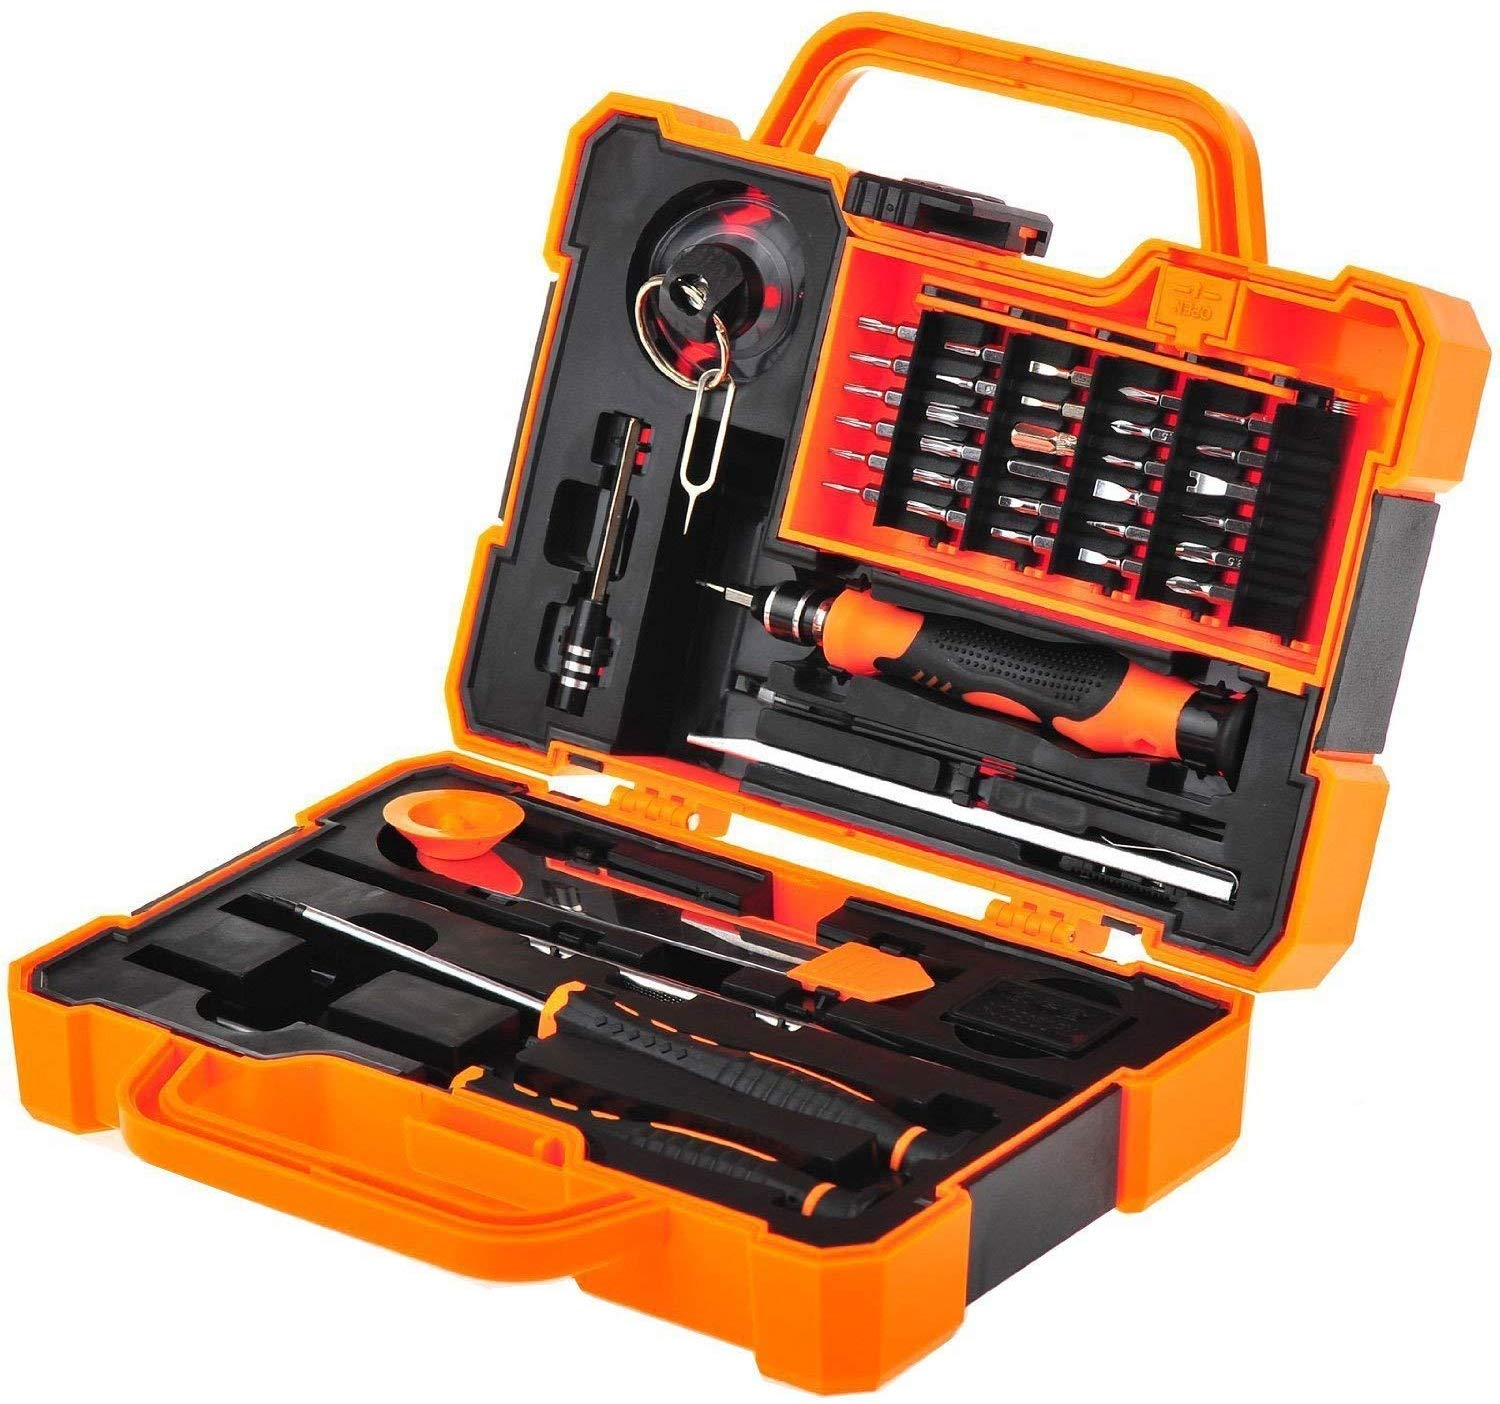 Hyx Tool Kits JF-8161 8 in 1 Battery Repair Tool Set for iPhone 6